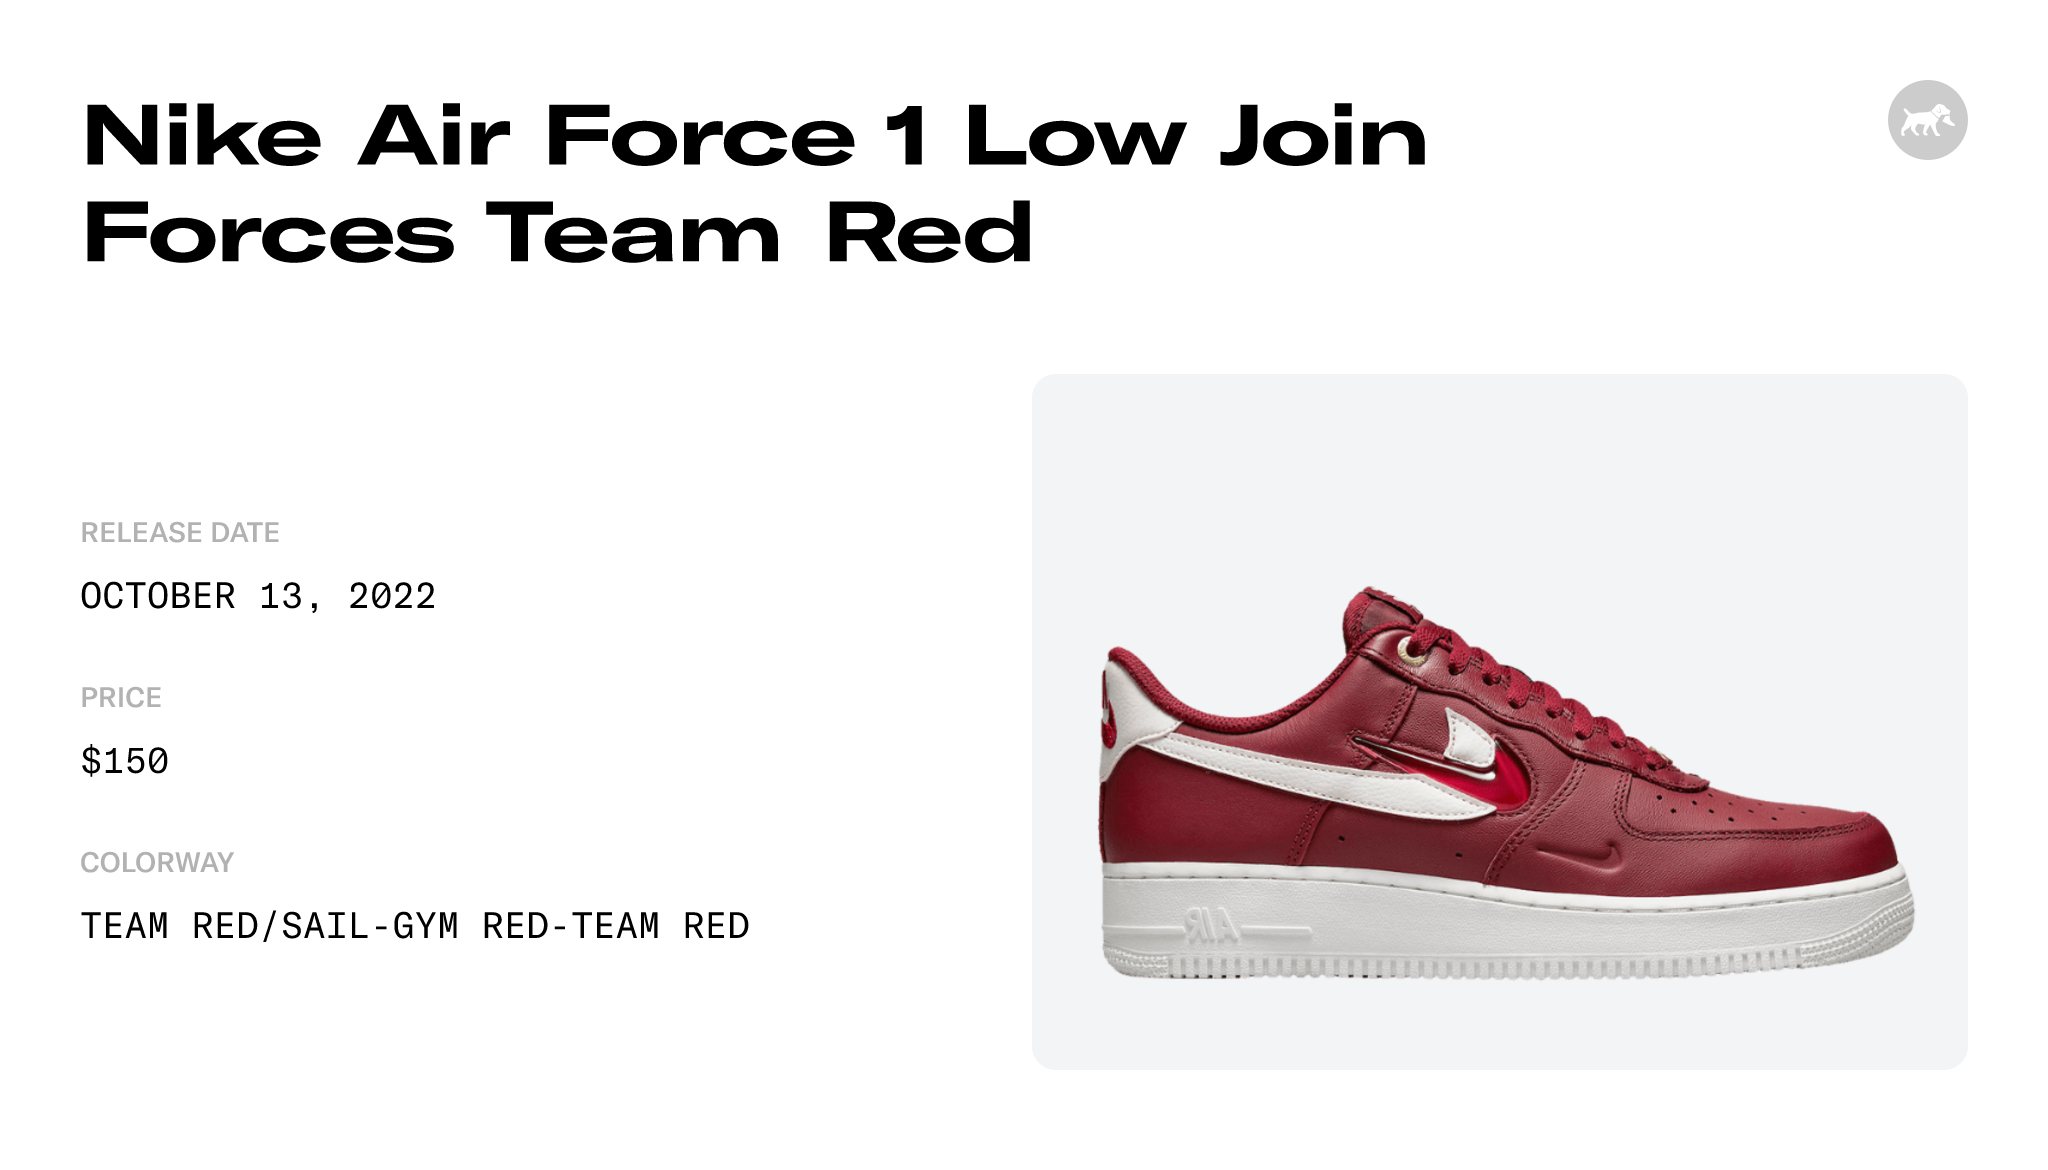 Nike Air Force 1 '07 LV8 1 Red / 13